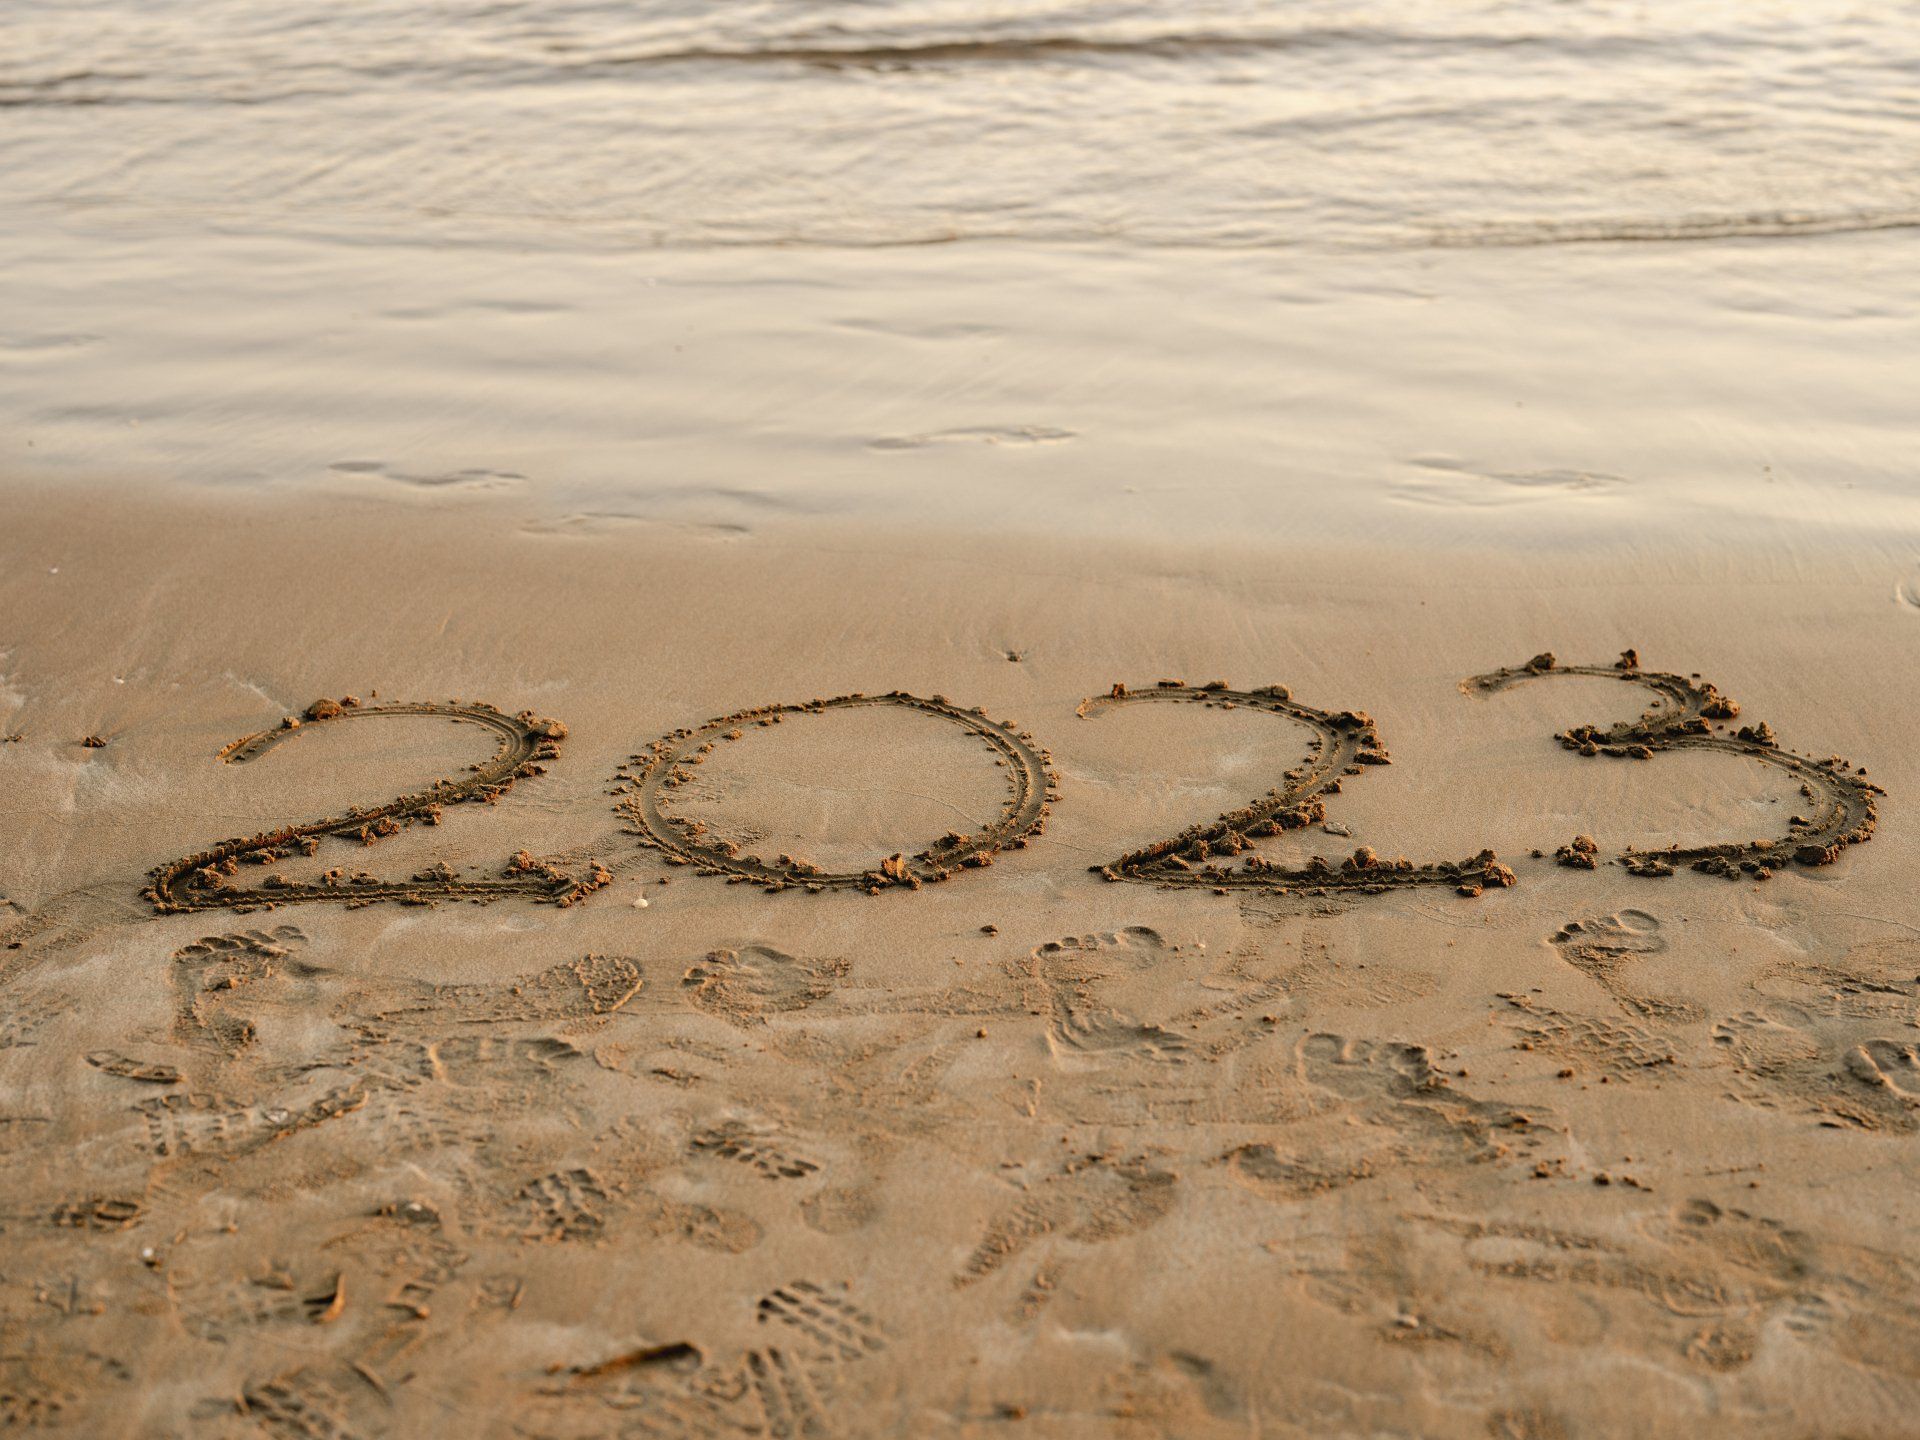 The numbers 2023 written in the sand